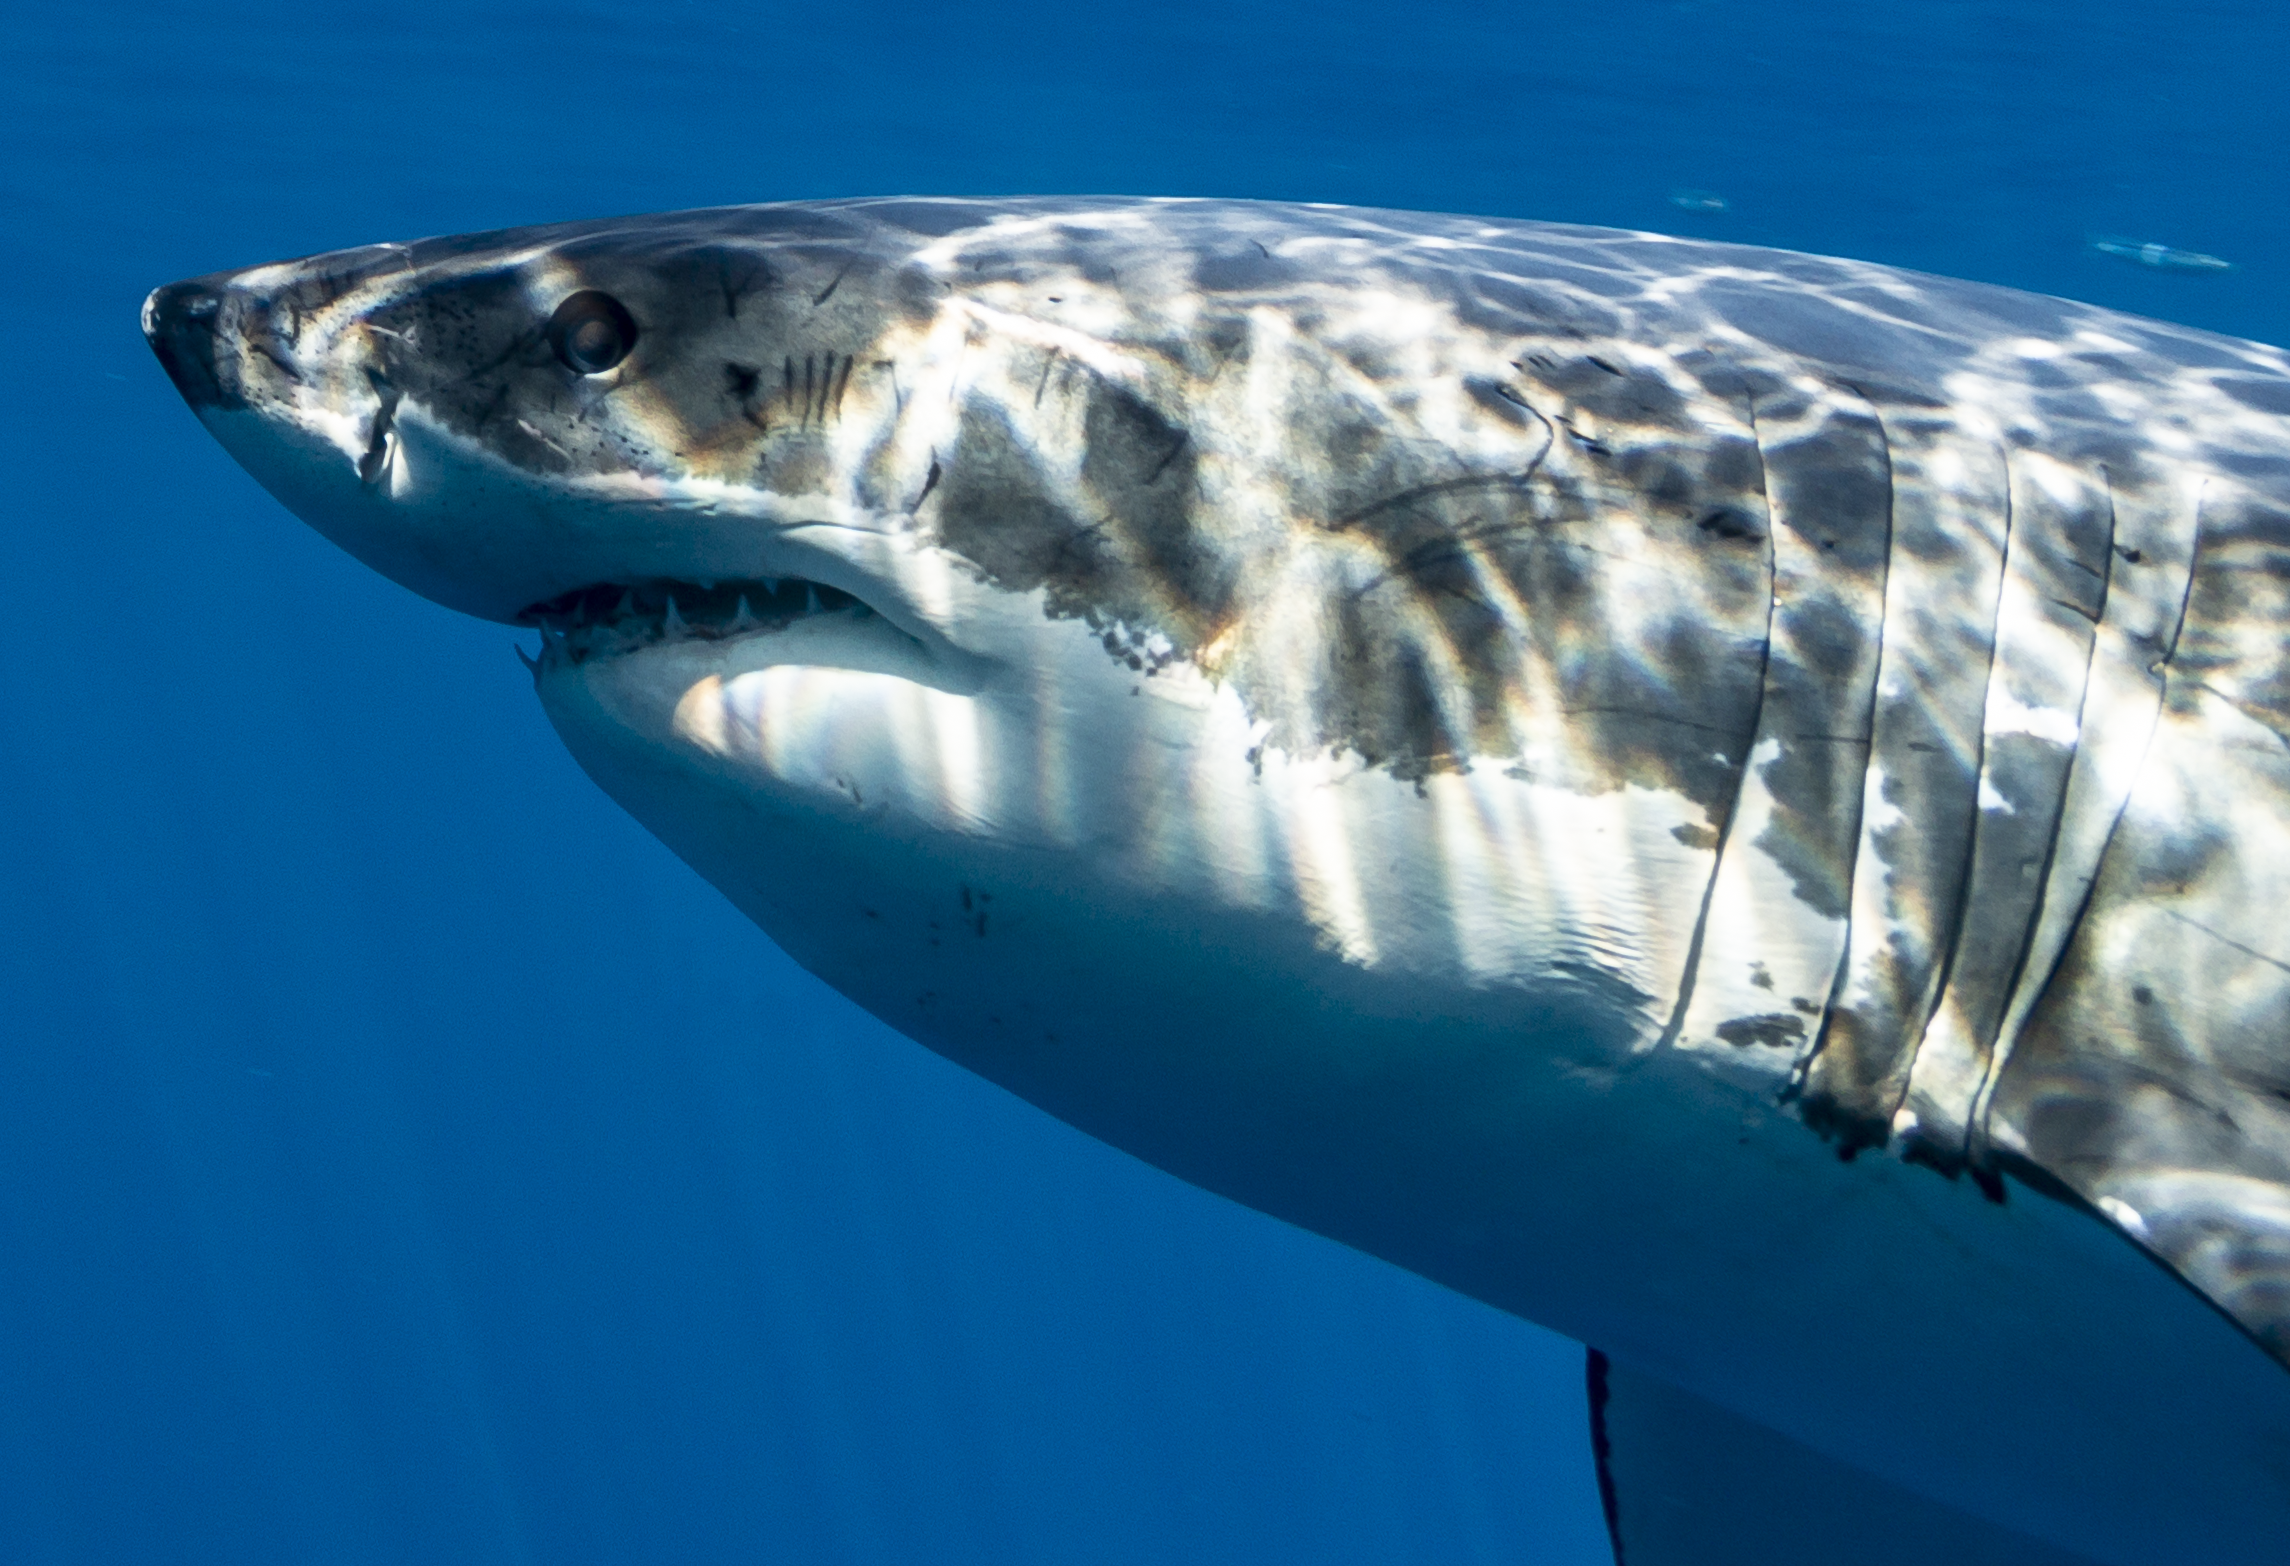 Detail of a massive great white shark